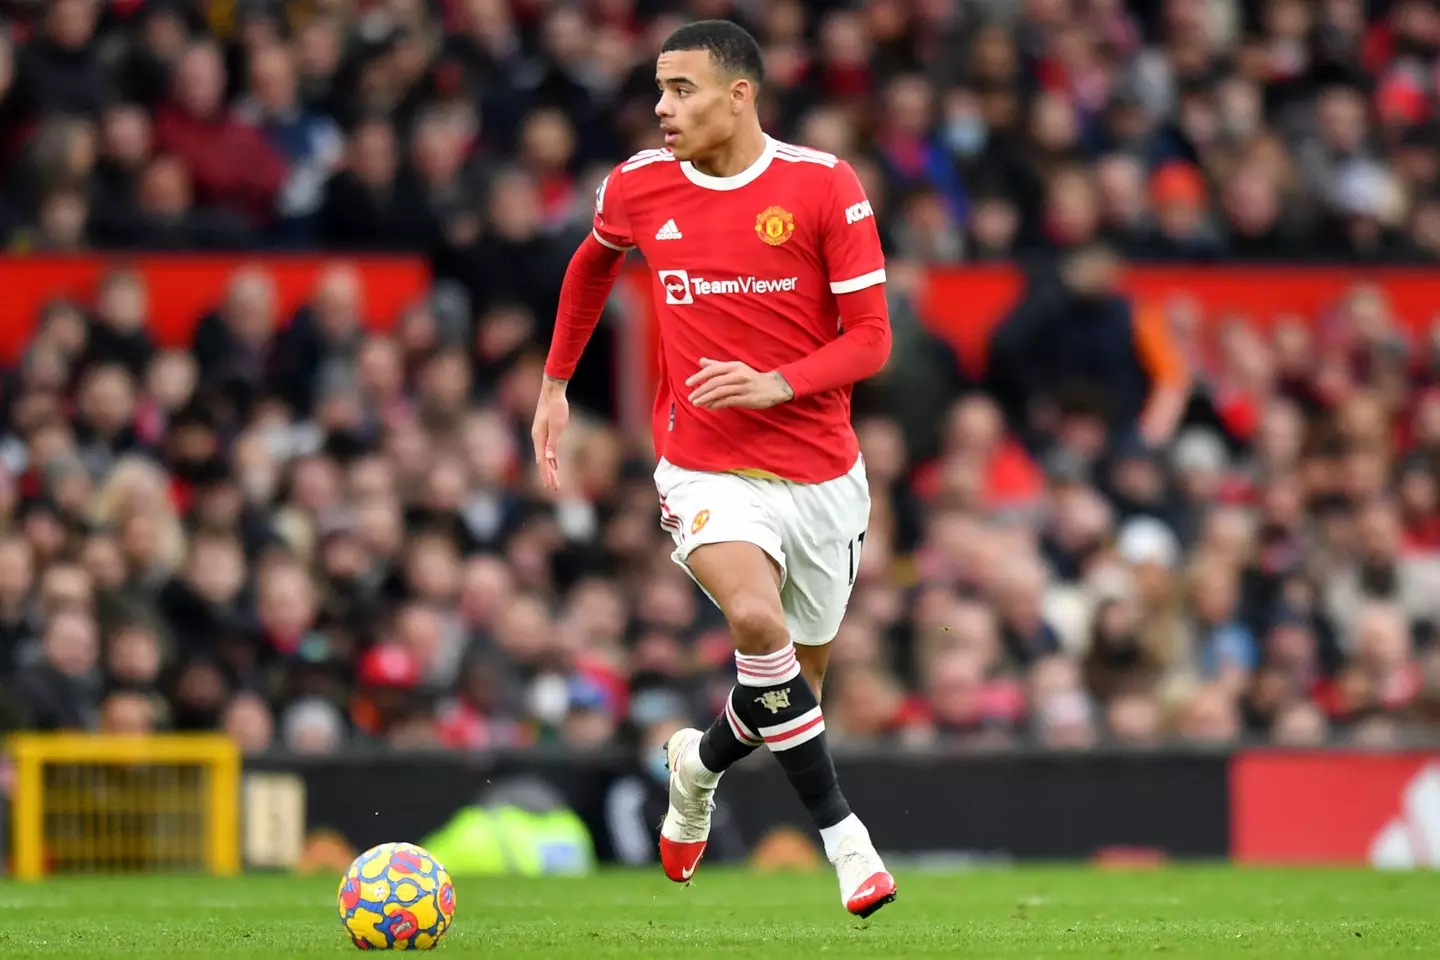 Mason Greenwood in action for Manchester United. (Image